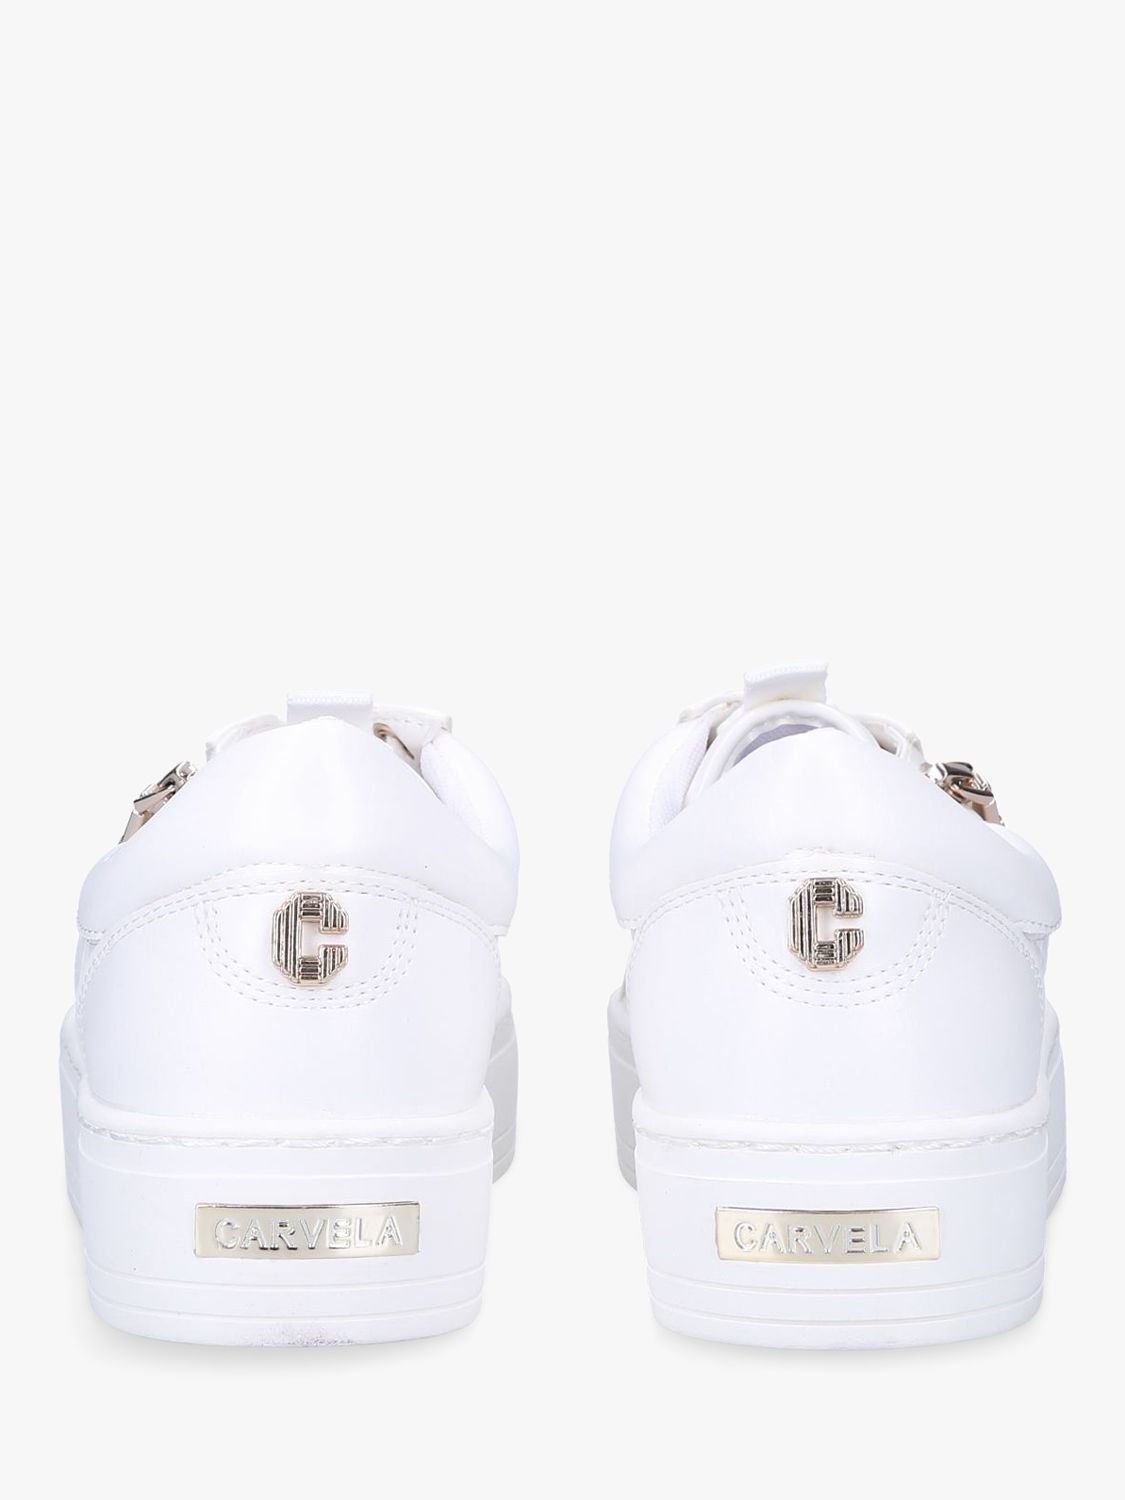 Carvela Junior Zip Lace Up Trainers, White at John Lewis & Partners